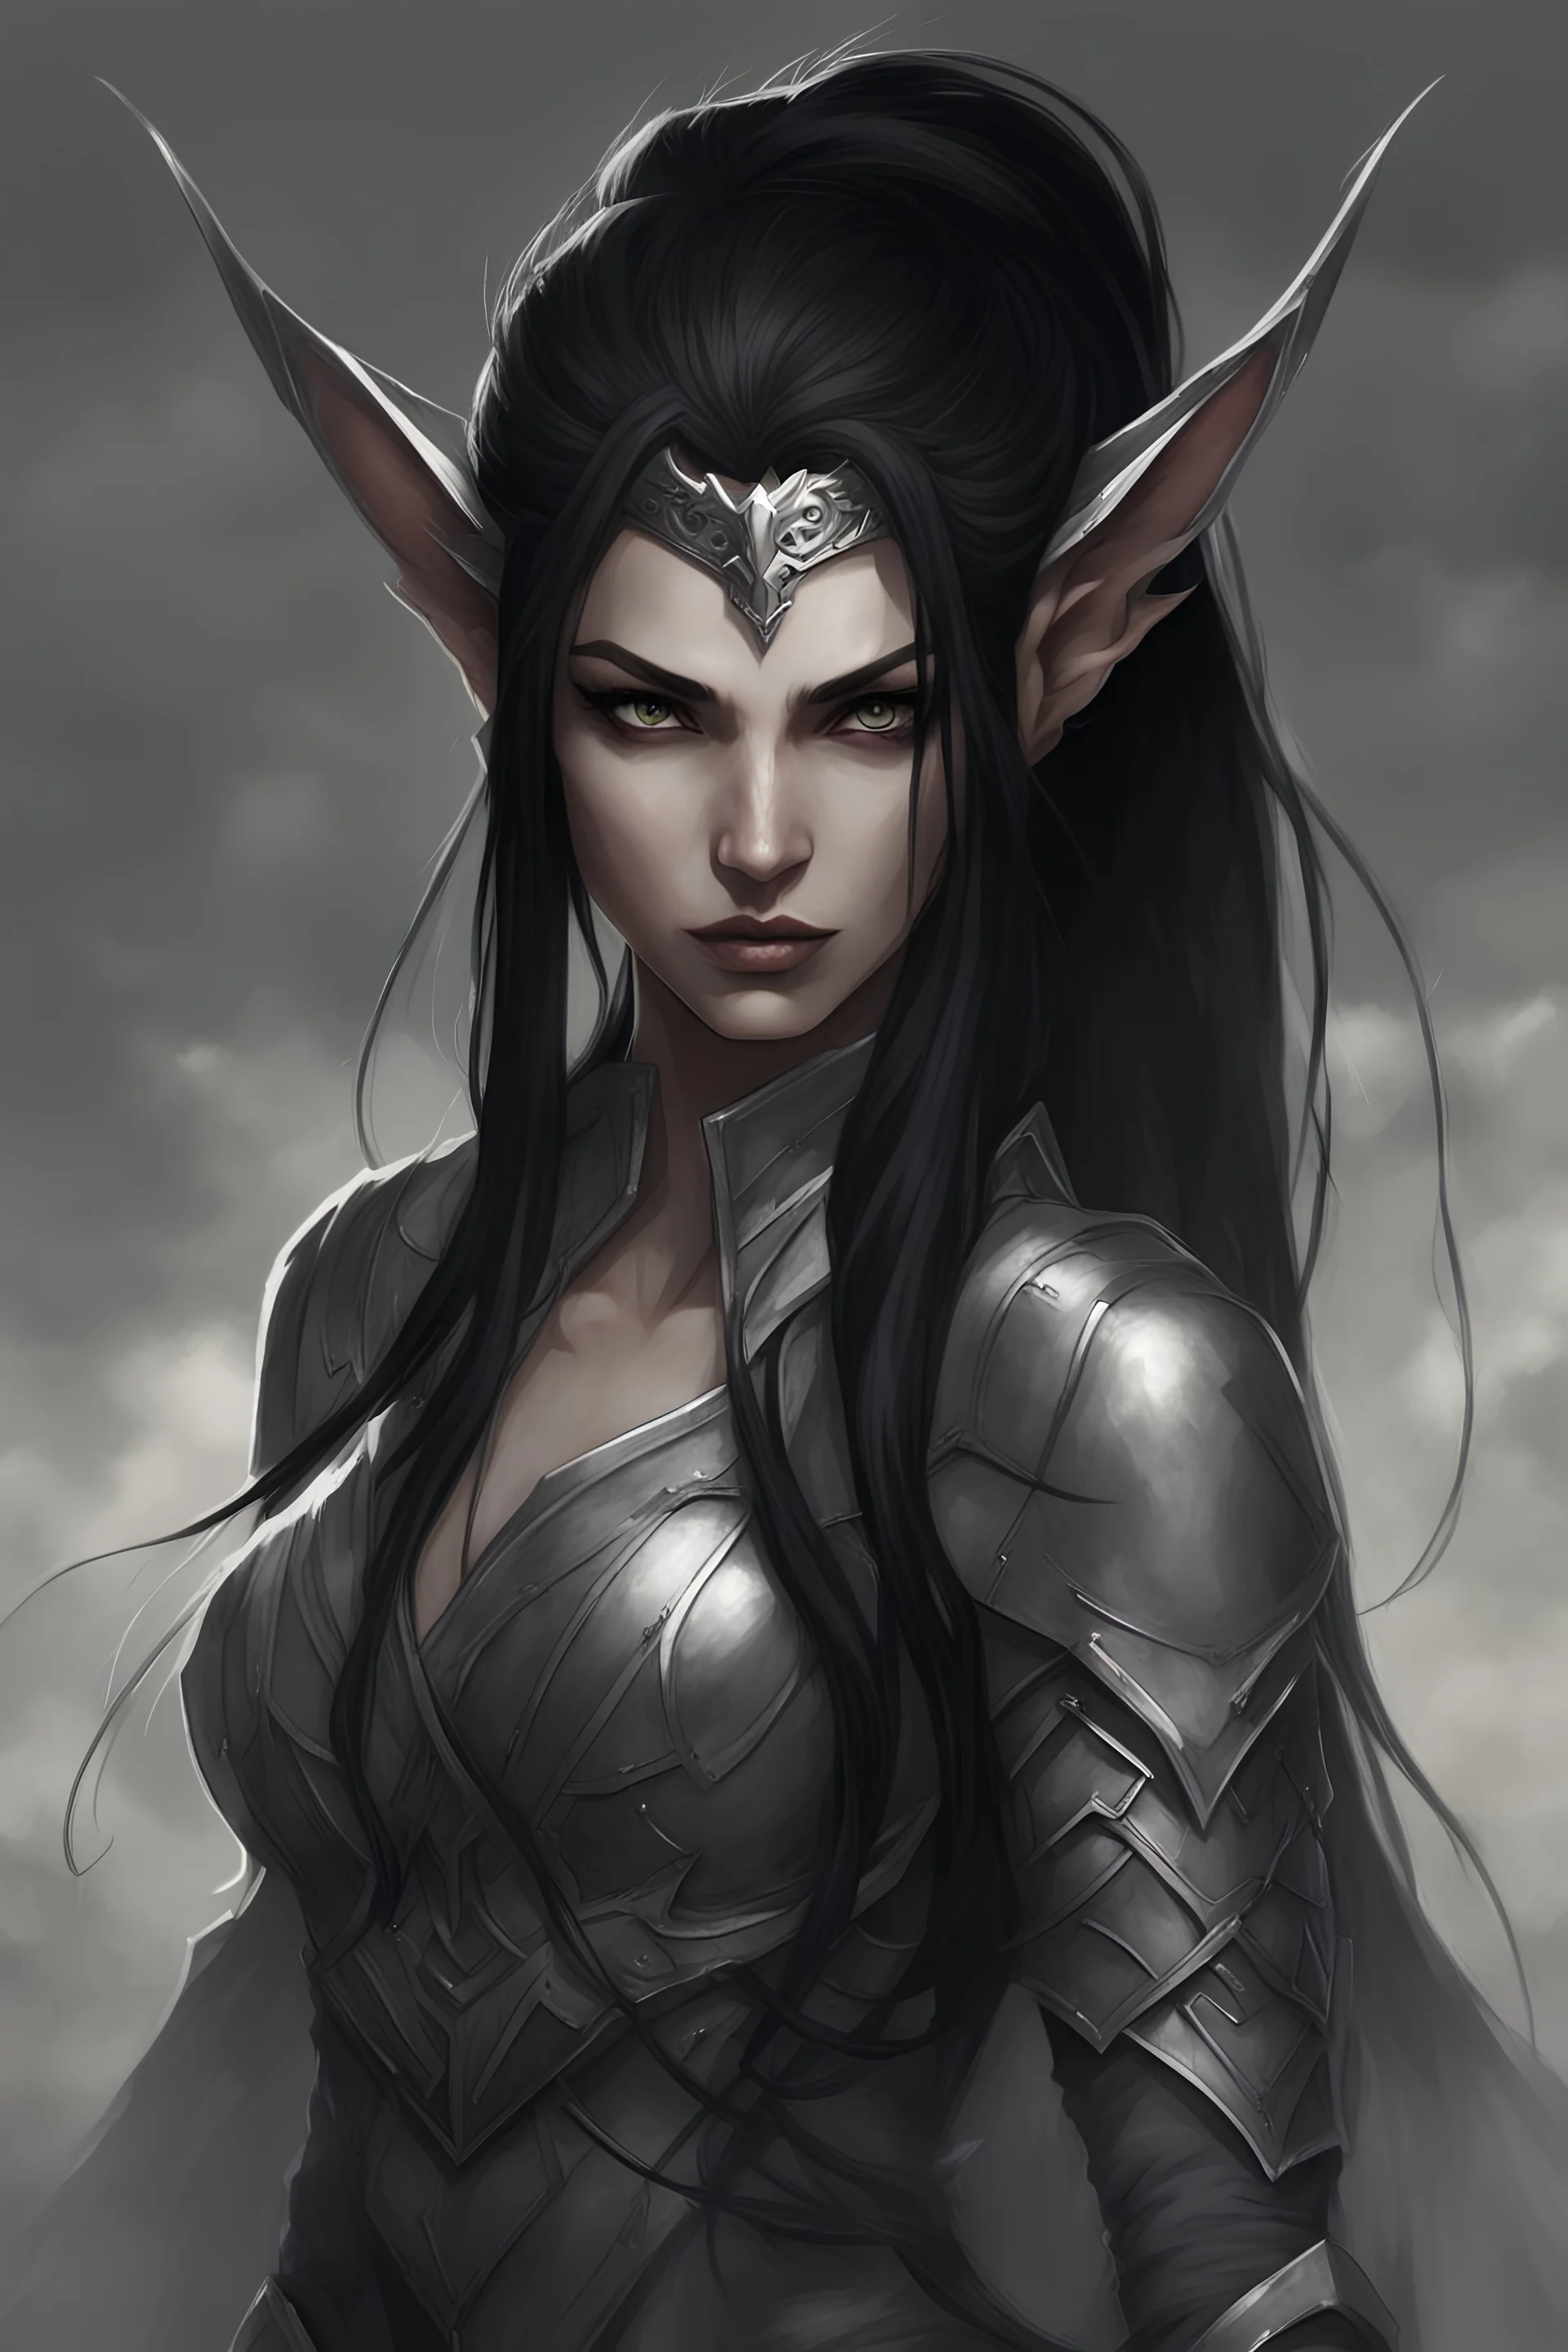 A female elf with skin the color of storm clouds, deep grey, stands ready for battle. Her long black hair flows behind her like a shadow, while her eyes gleam with a fierce shiny silver light . Despite the grim set of her mouth, there's a undeniable beauty in her fierce countenance. She's been in a fight, evidenced by the ragged state of her leather armor and the red cape that's seen better days, edges frayed and torn. In her hands, she grips two swords